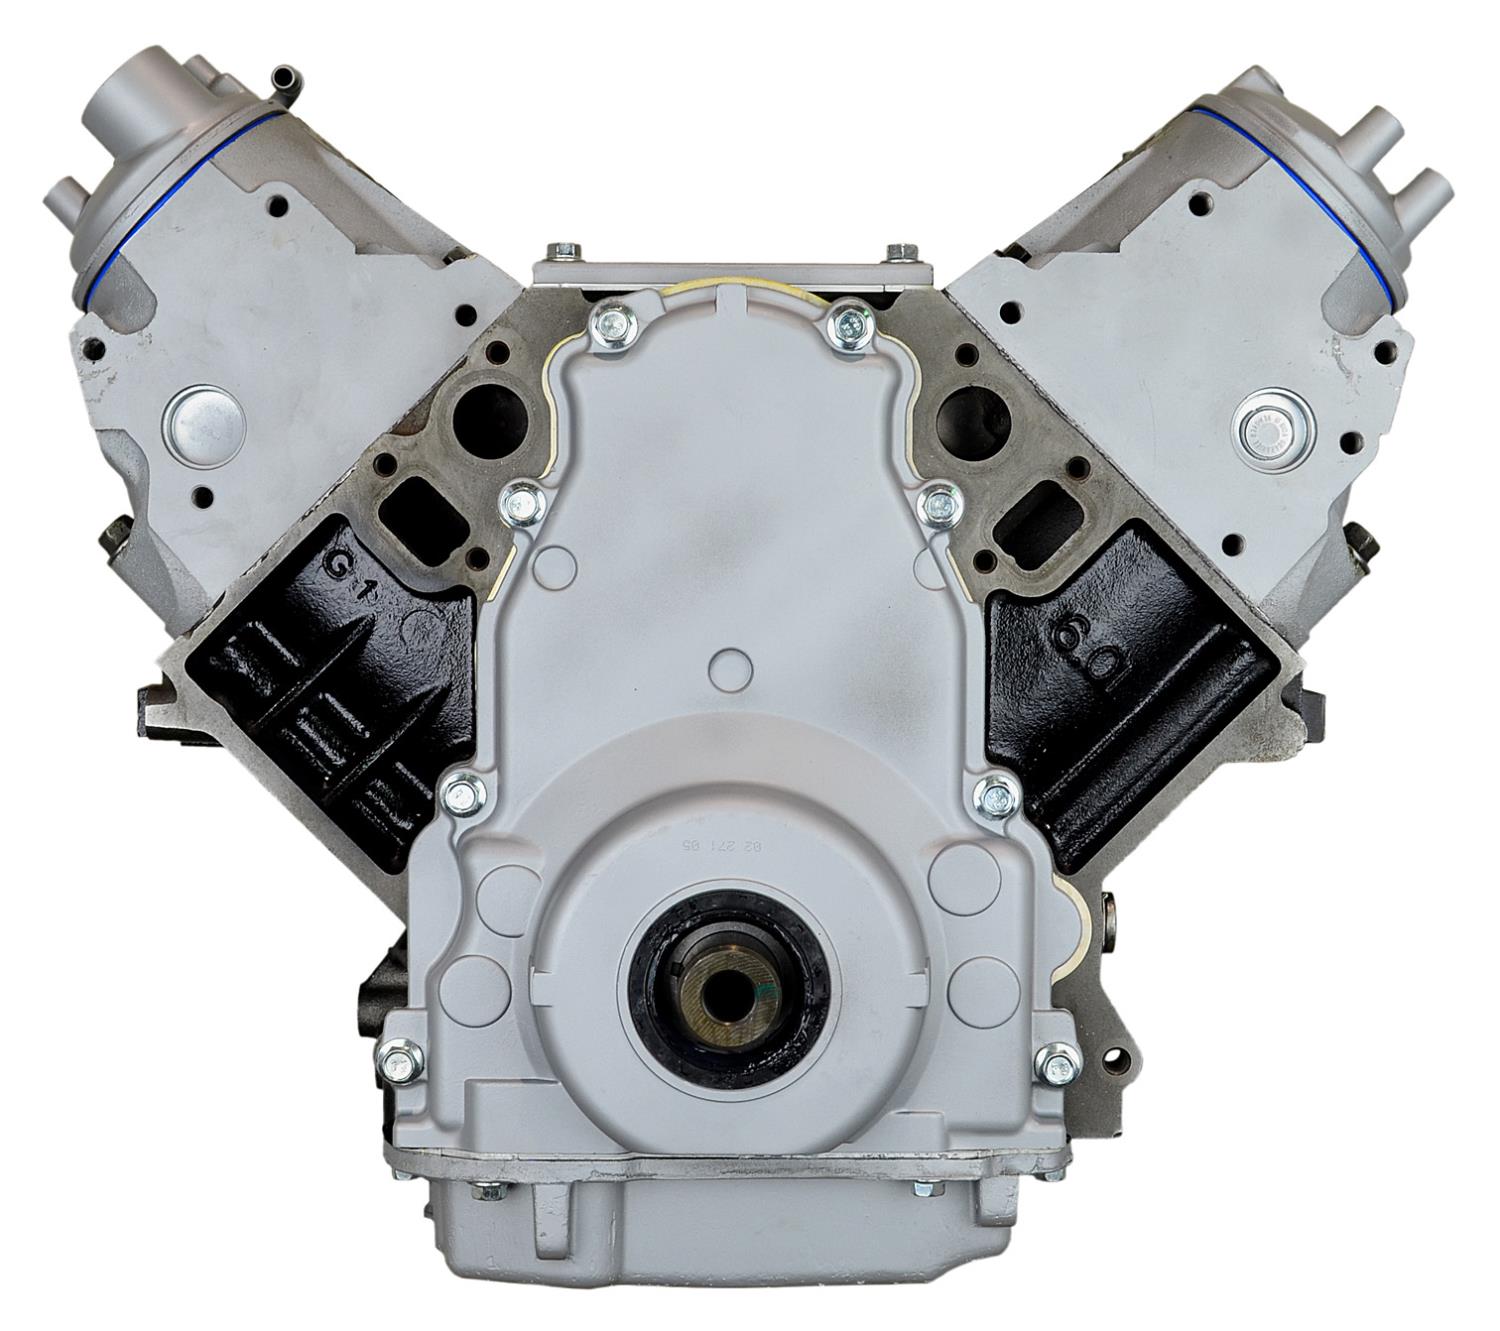 VCTF4WD Remanufactured Crate Engine for 2001-2007 Chevy/GMC HD Truck, SUV & Van with 6.0L V8